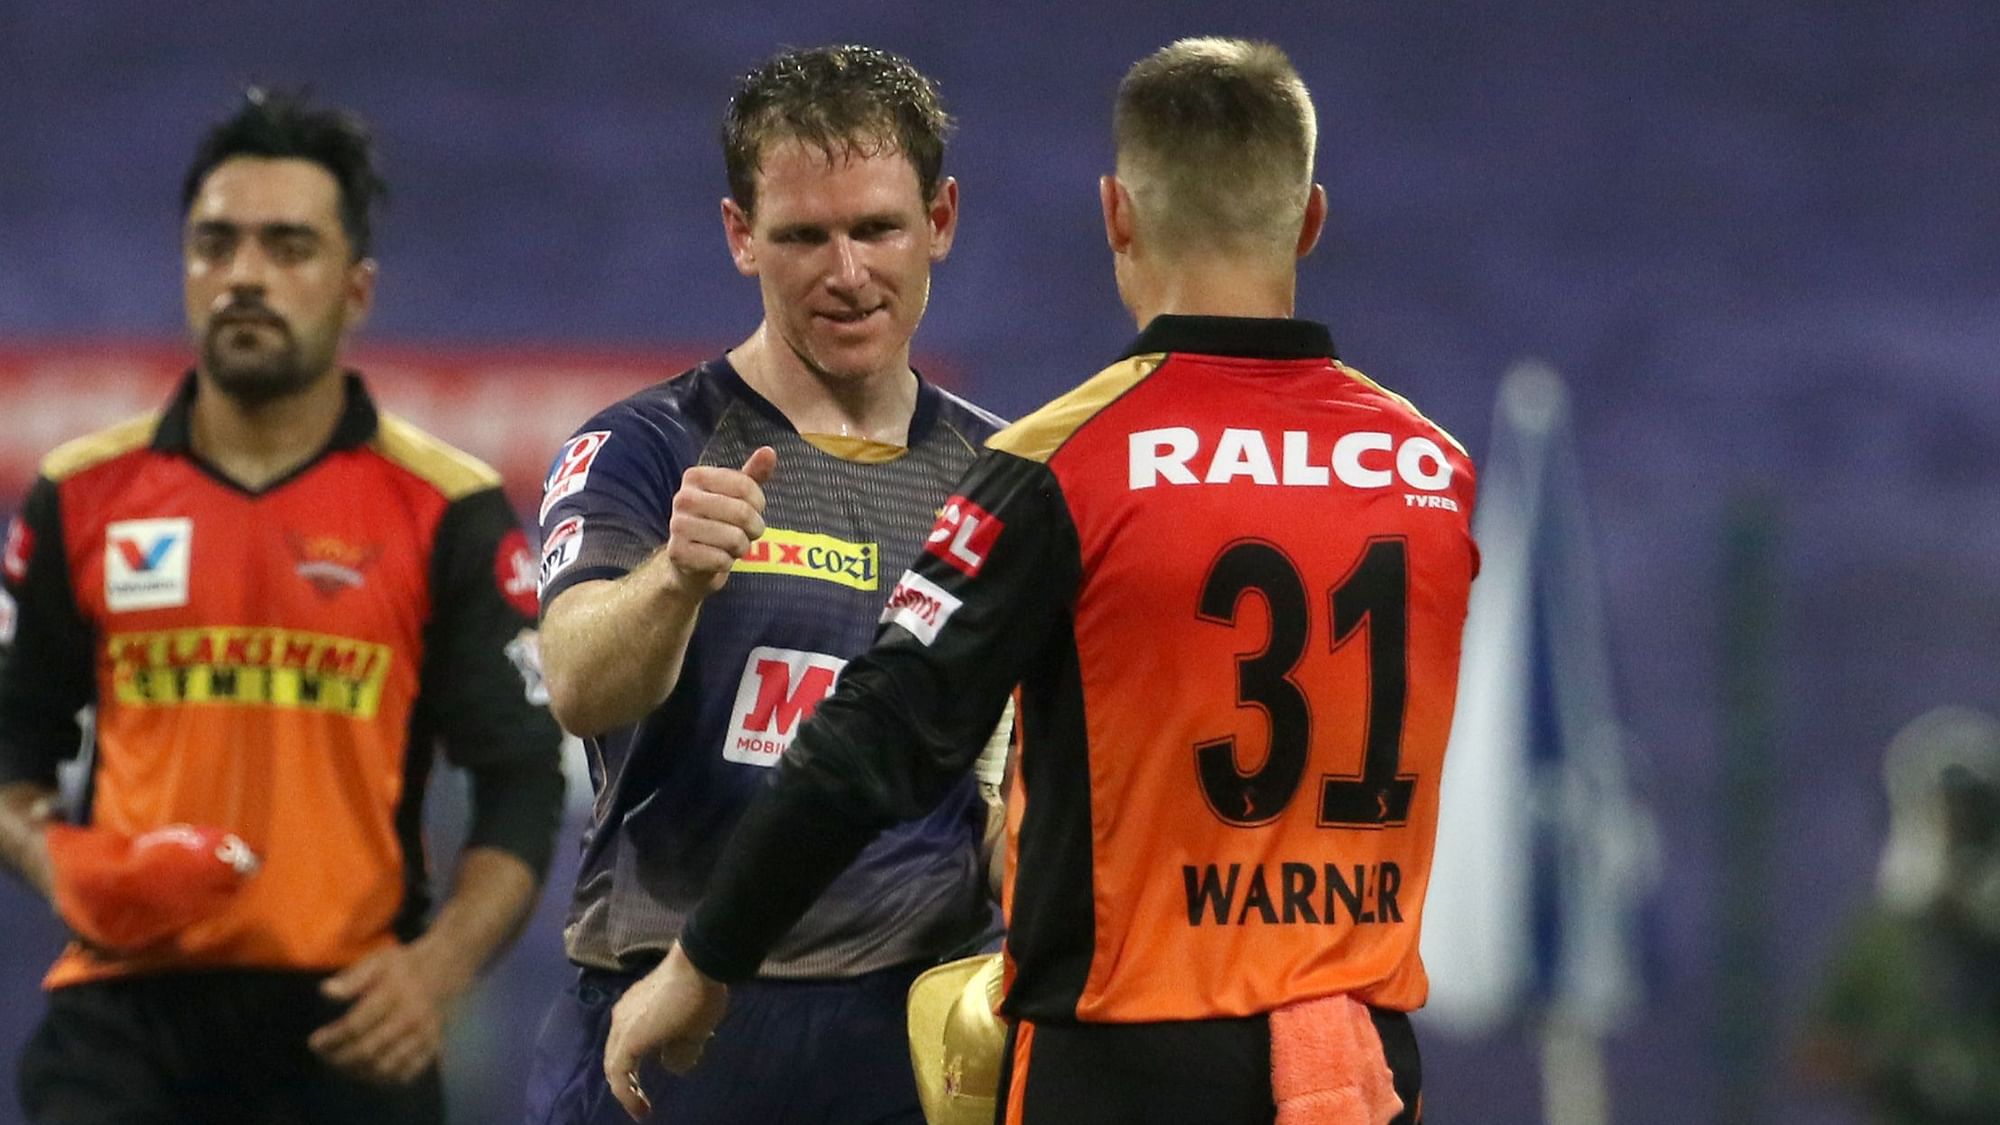 KKR defeated SRH by 7 wickets in their previous encounter.